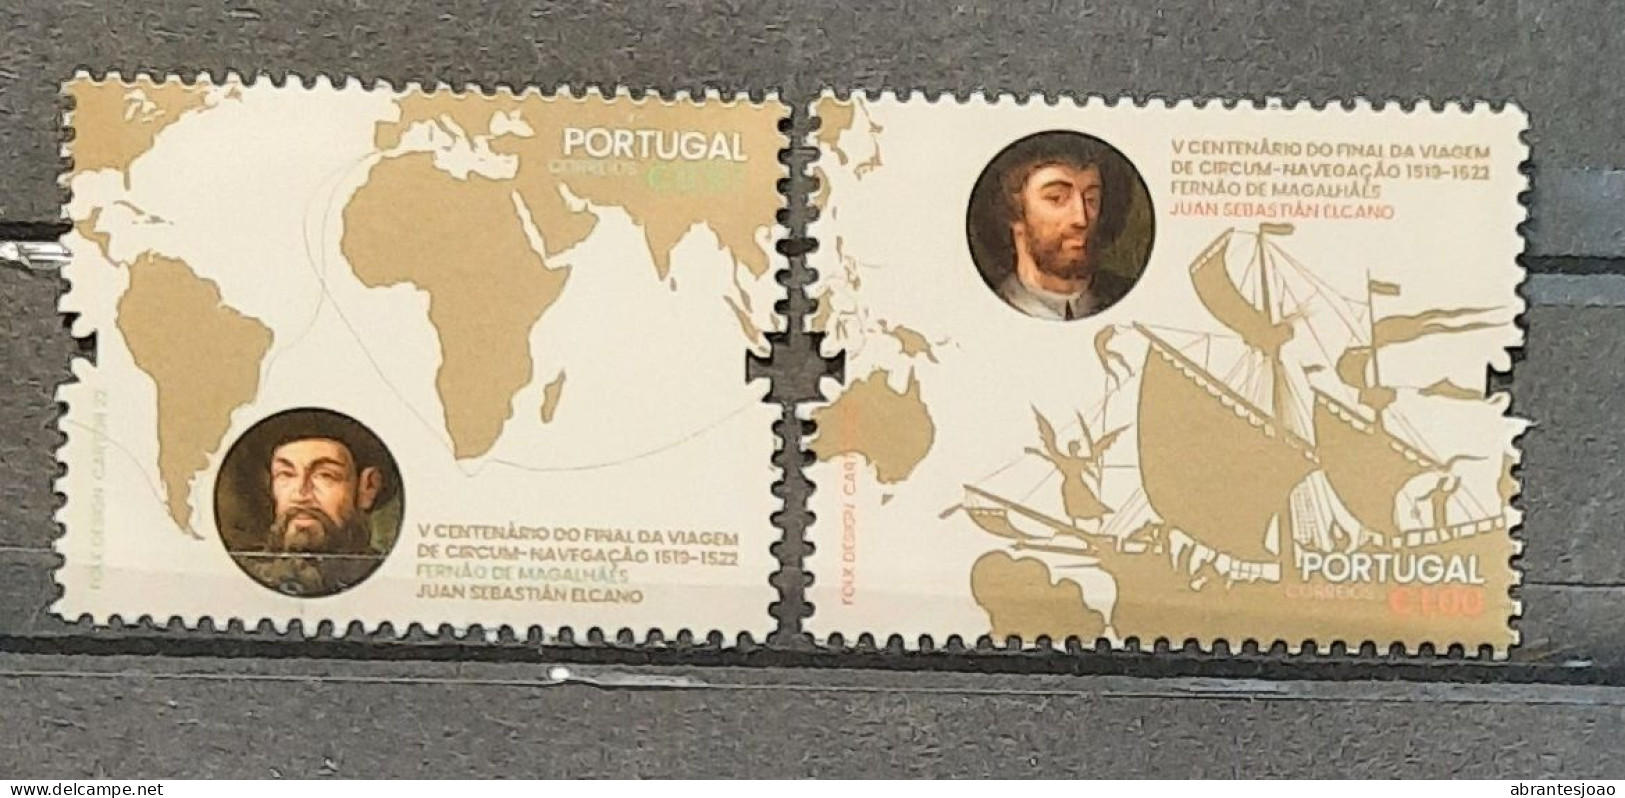 2022 - Portugal - MNH - 500 Years Since Final Of Circumnavigation Trip - 1519/1522 - 2 Stamps + Circular Block 1 Stamp - Unused Stamps